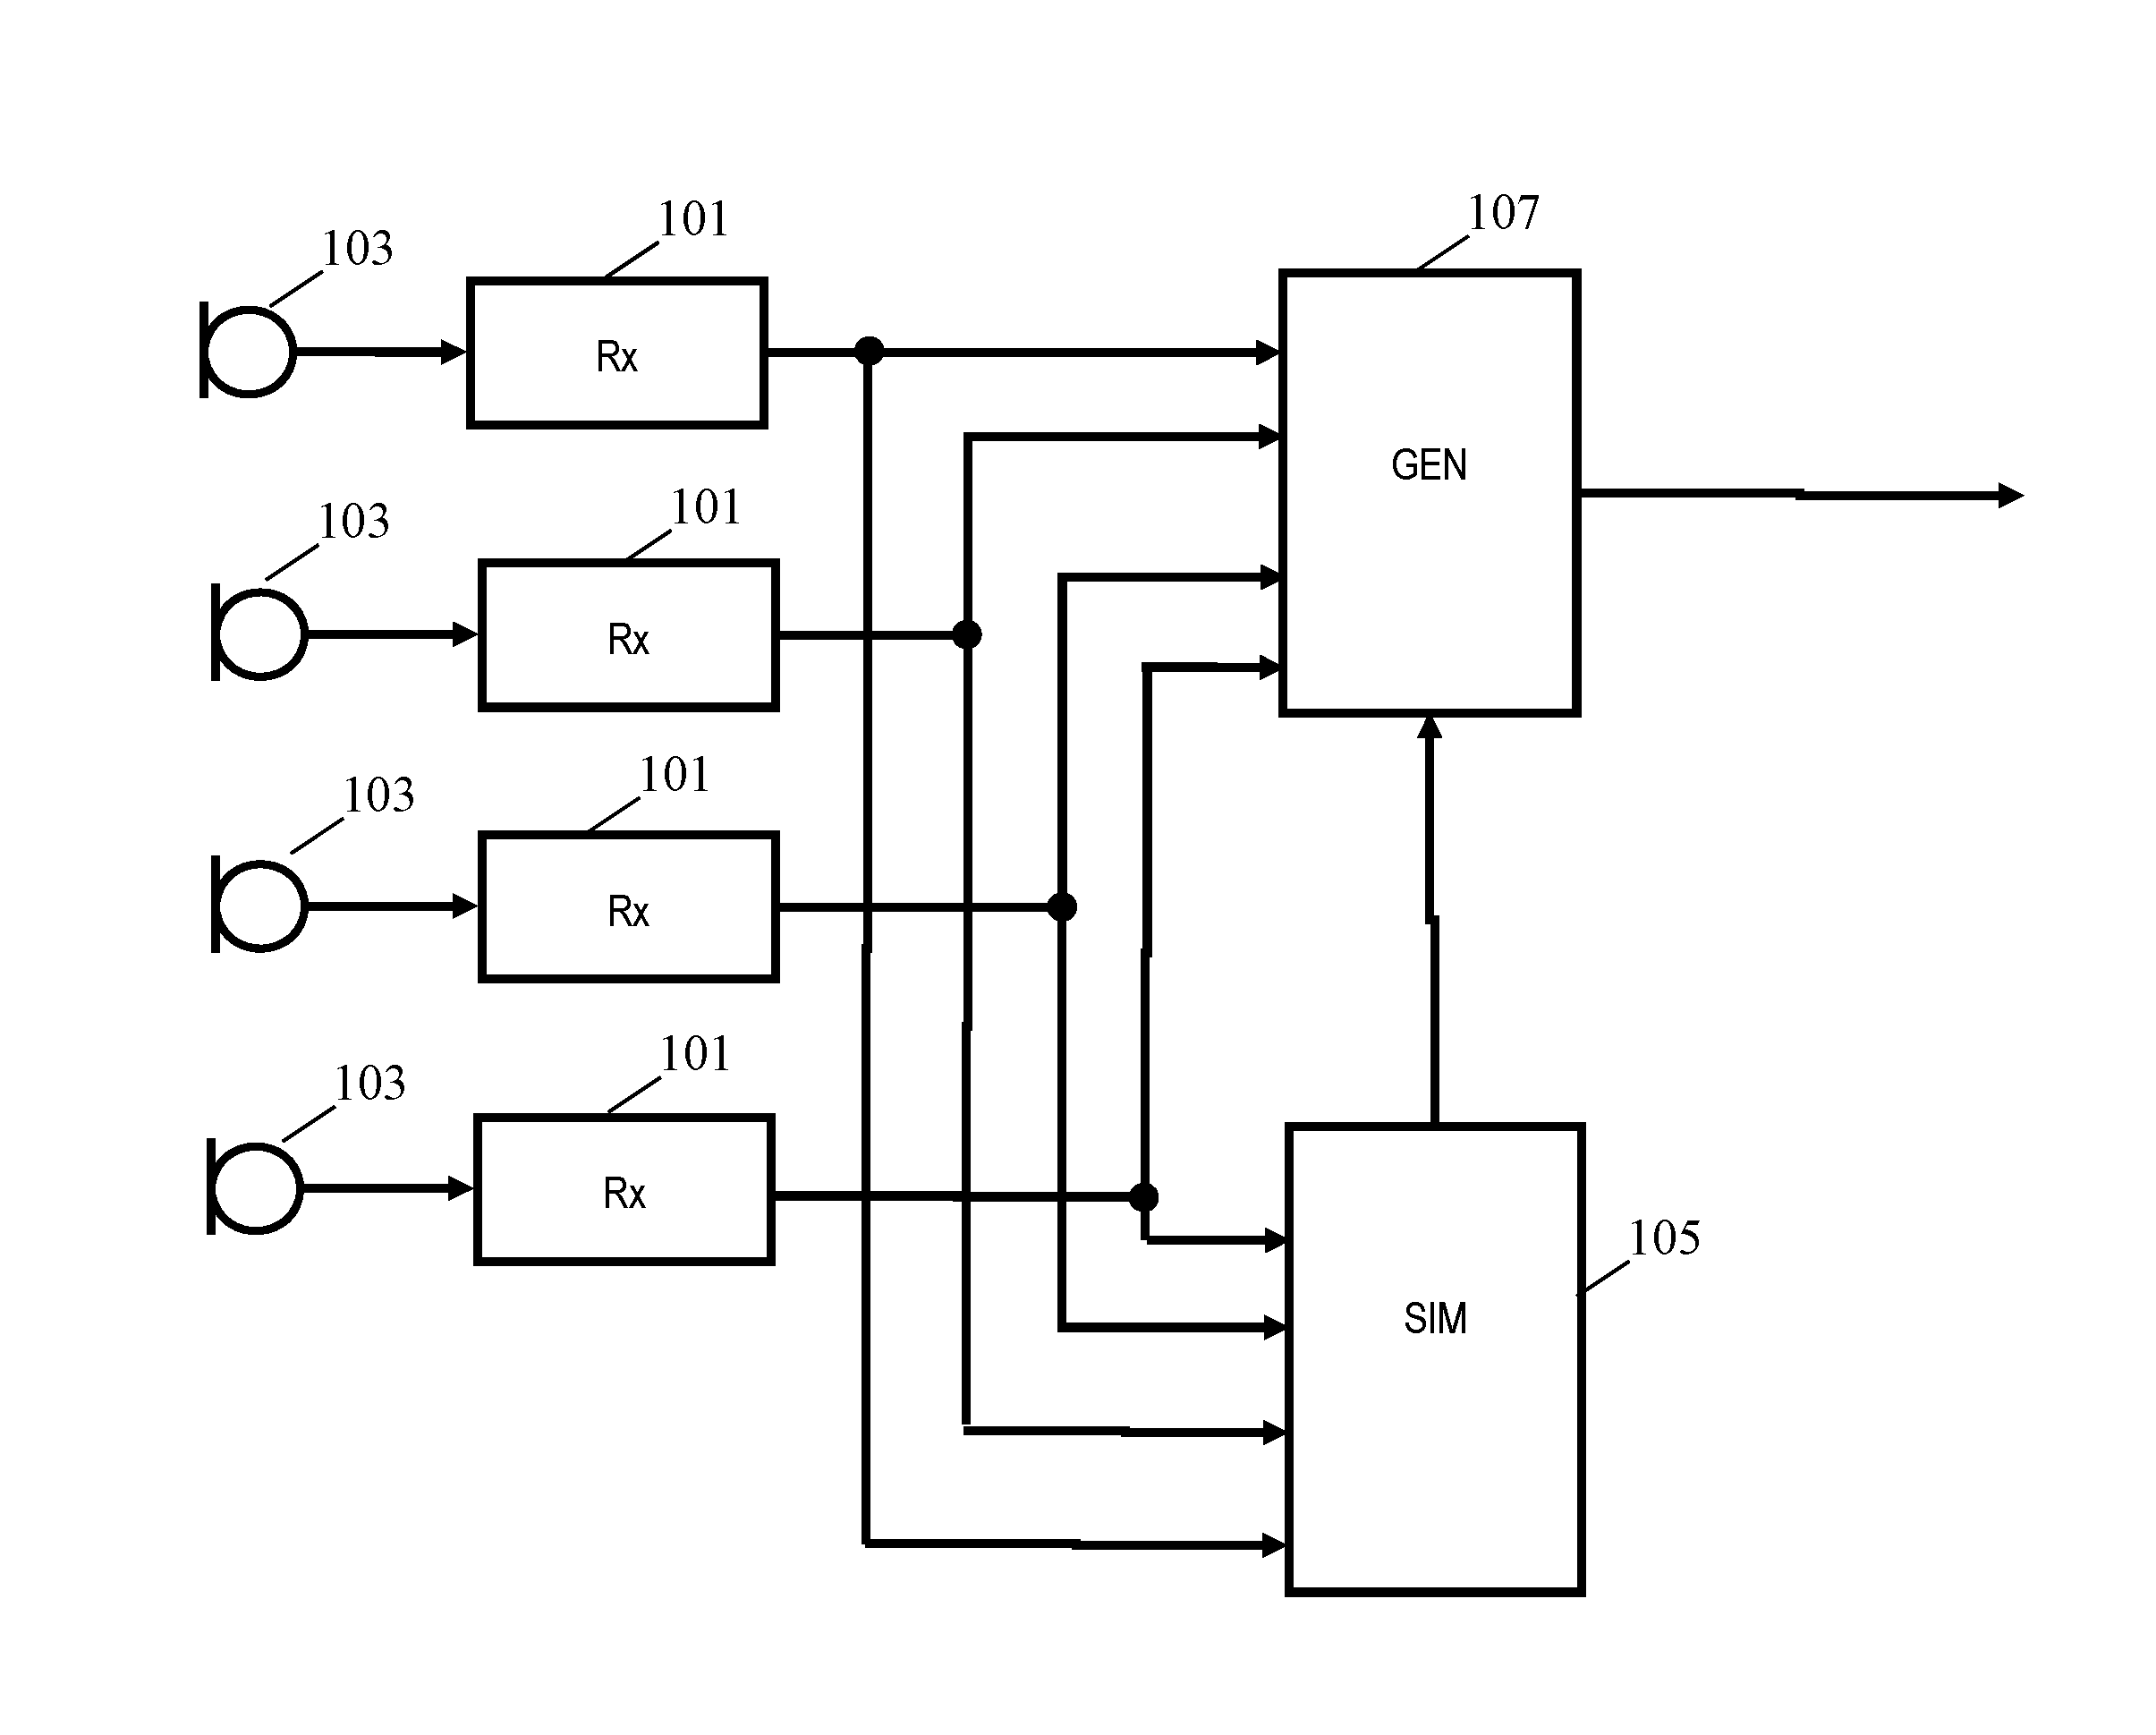 Method and apparatus for generating a speech signal